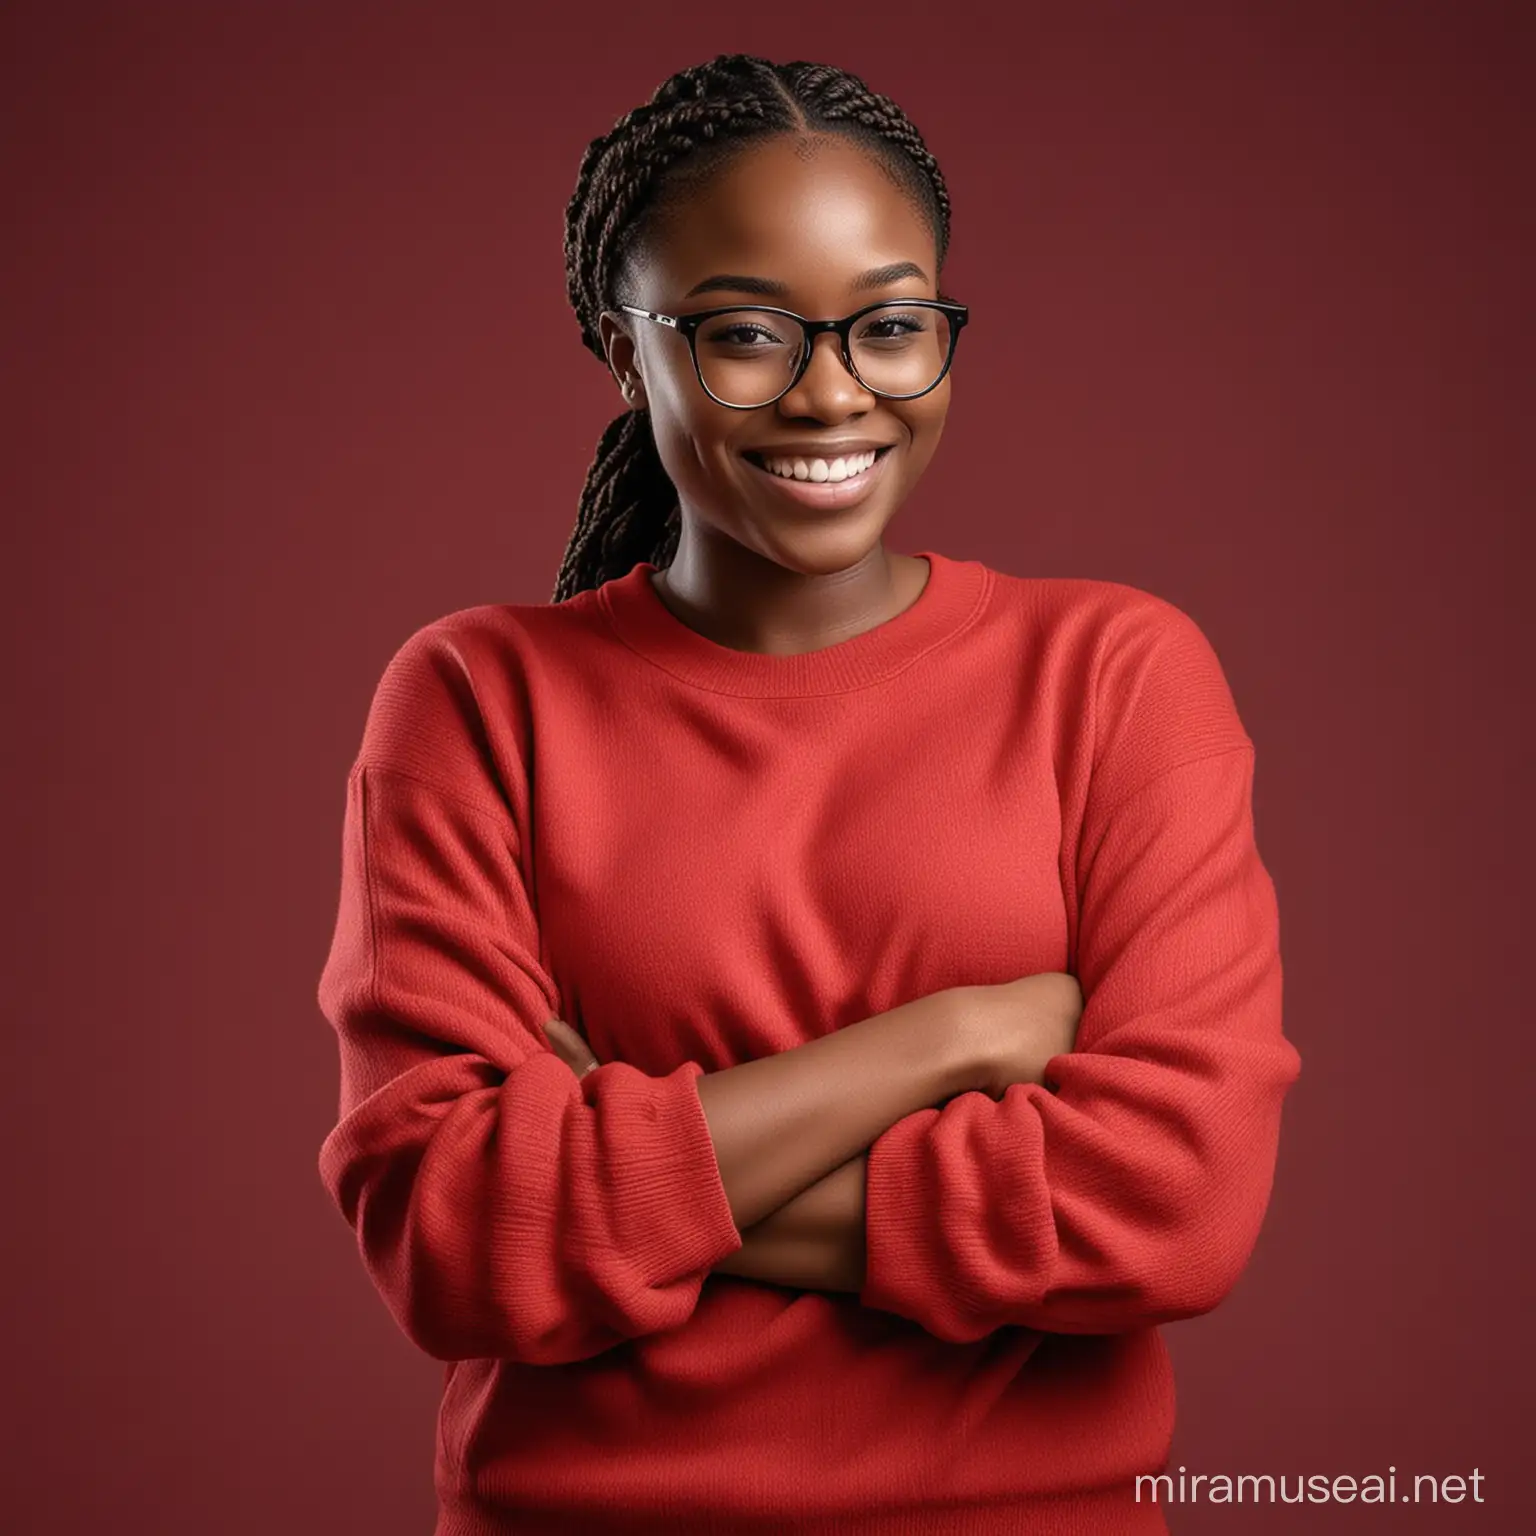 Smiling Nigerian Woman in Stylish Red Sweatshirt with Braided Hair